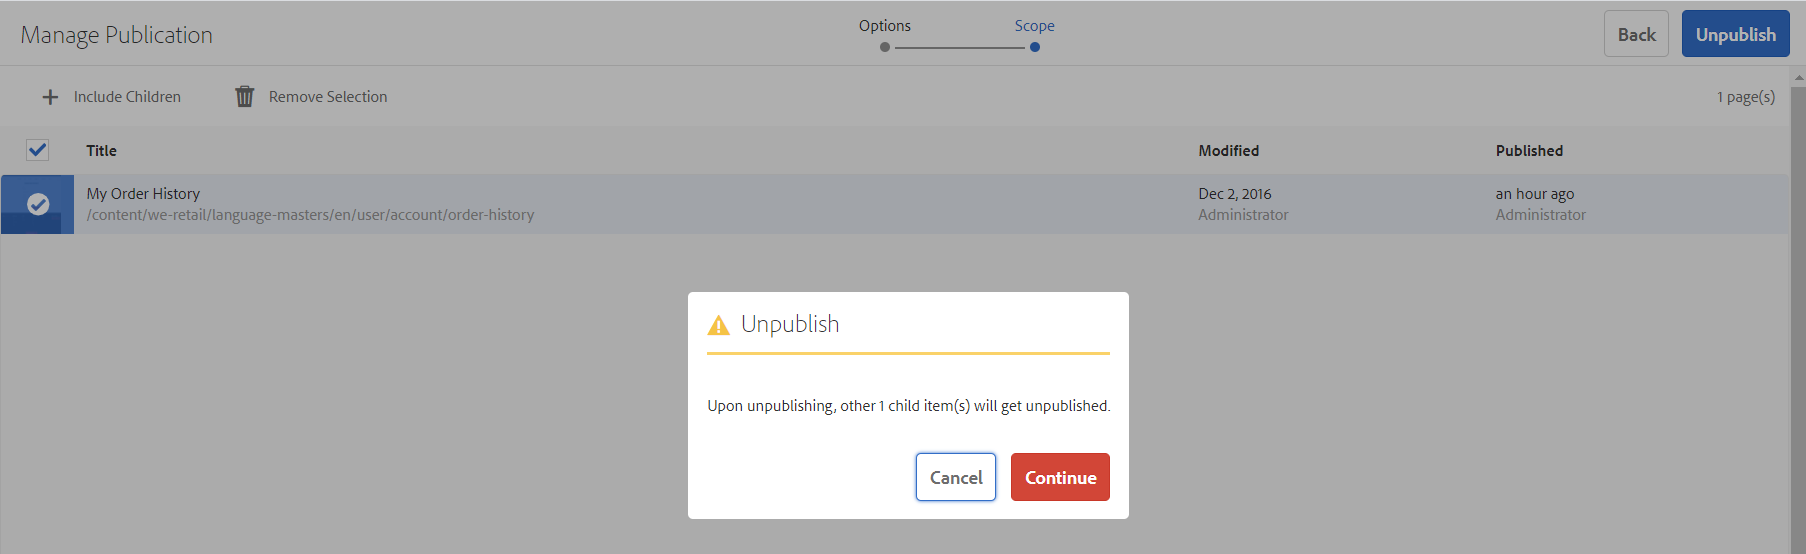 Don’t select the Include Children option when unpublishing